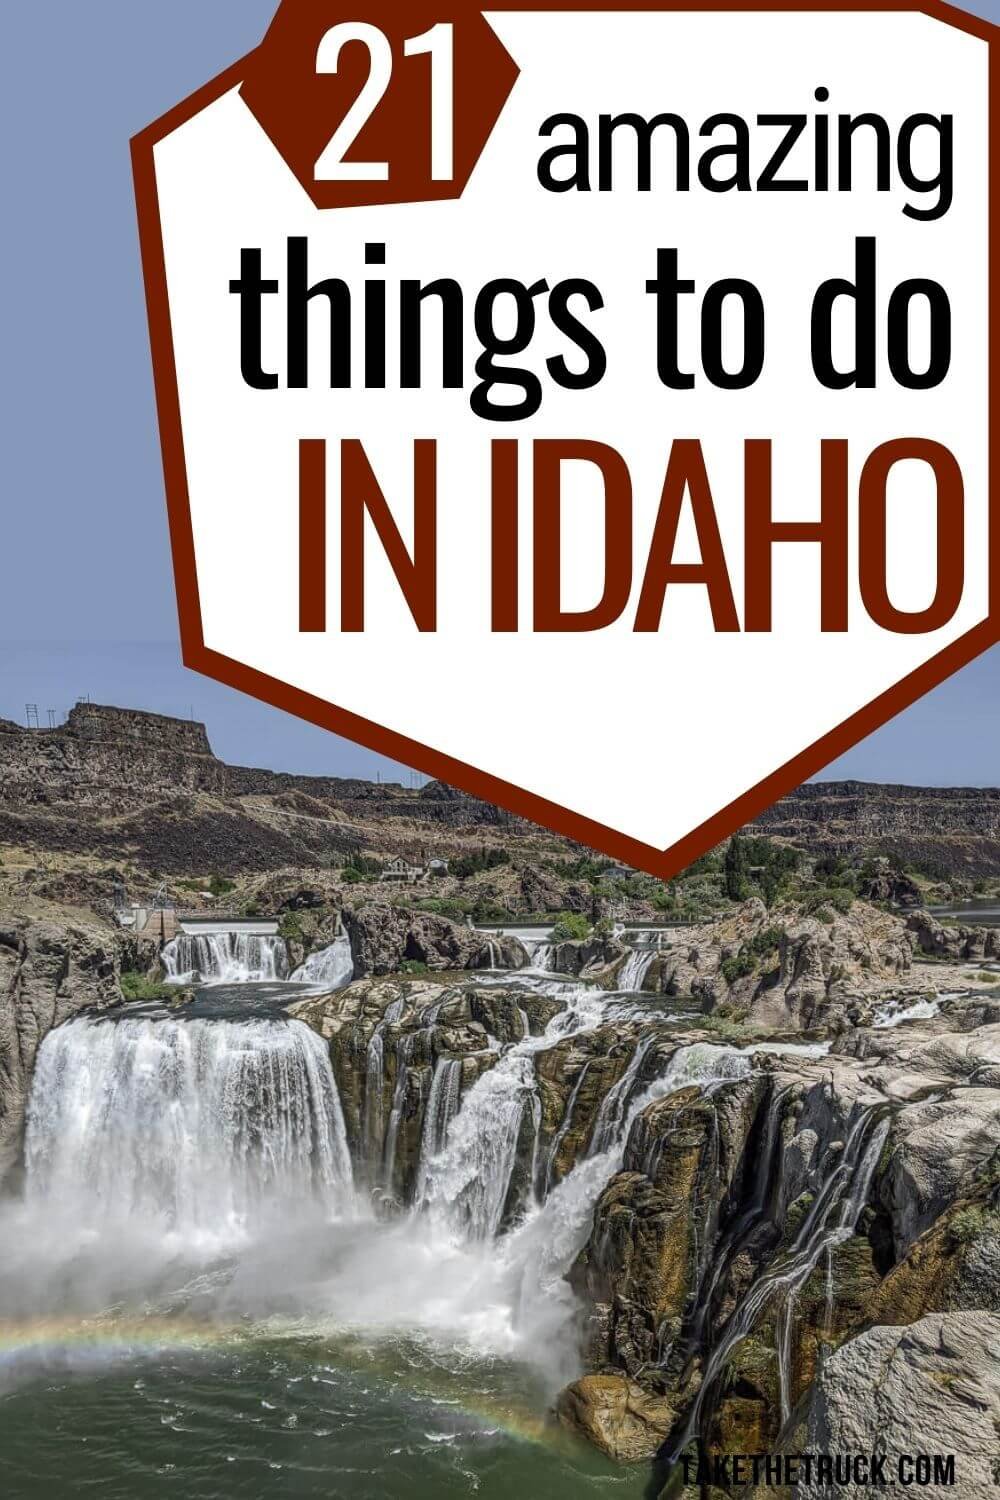 Planning some Idaho travel or an Idaho road trip? This post will help you find the top things to see in Idaho and the best things to do in Idaho - both northern Idaho and southern Idaho.